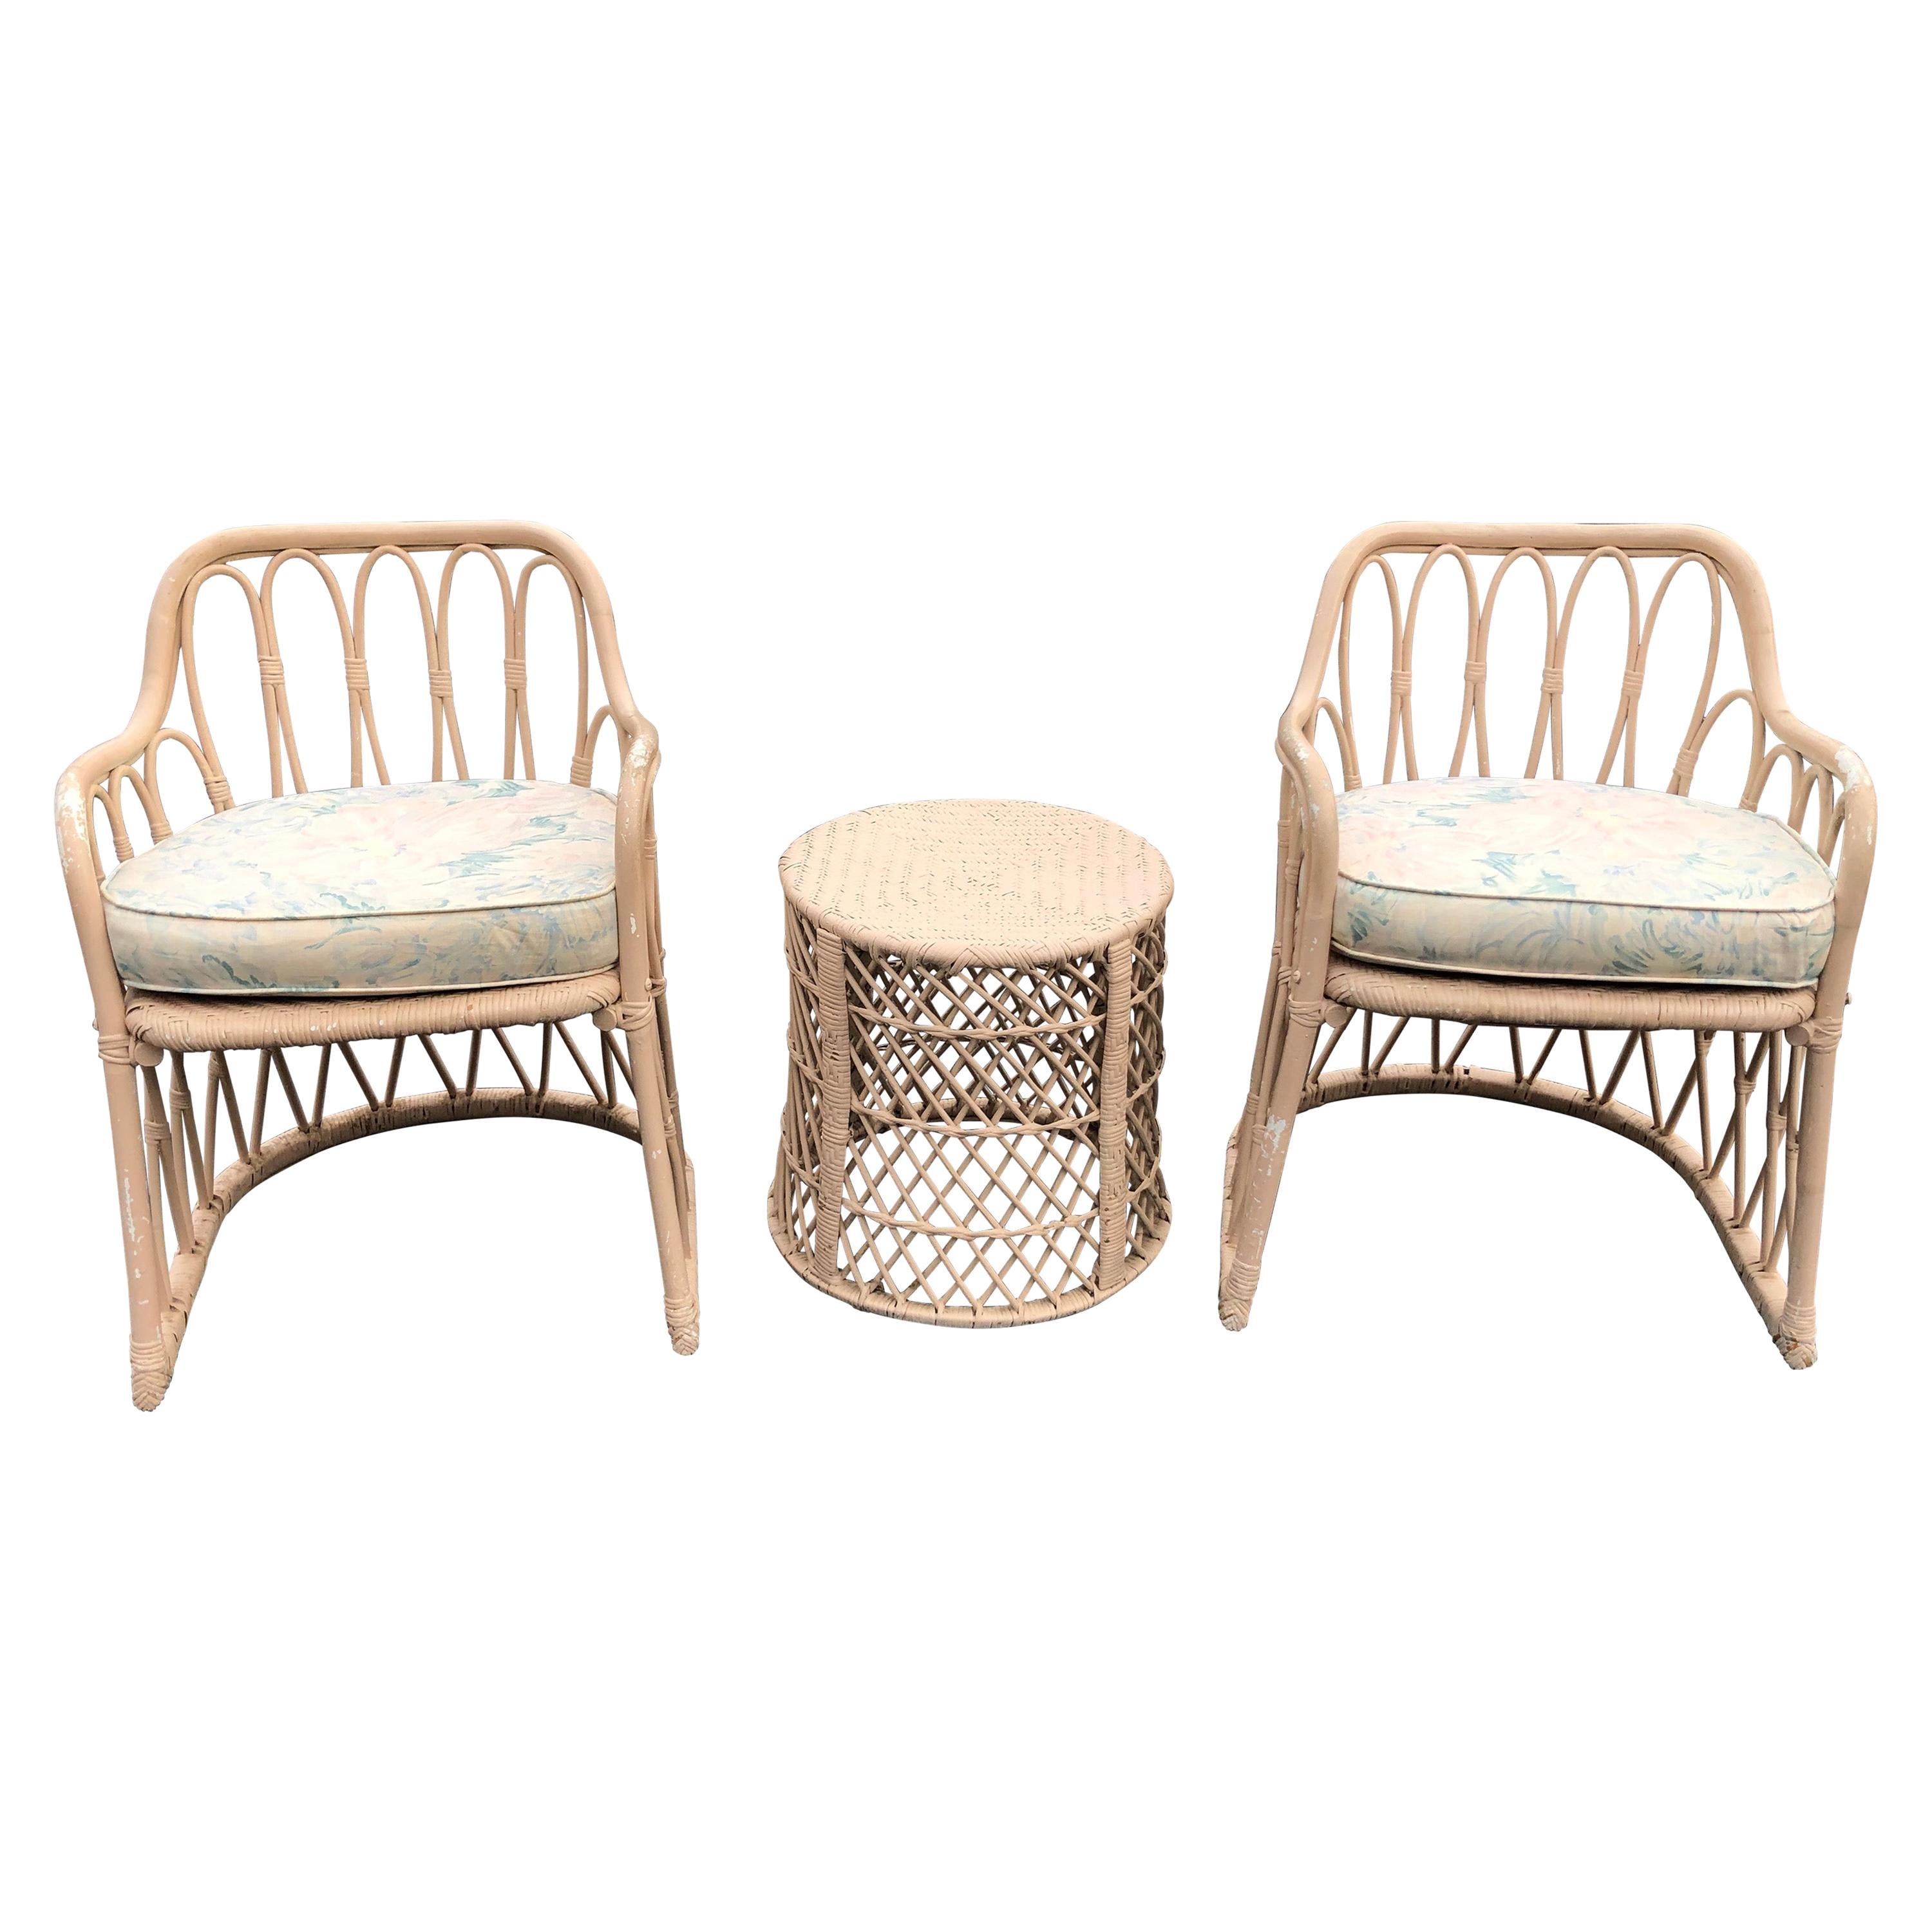 Pair of Mid Century Wicker Chairs with Matching Table